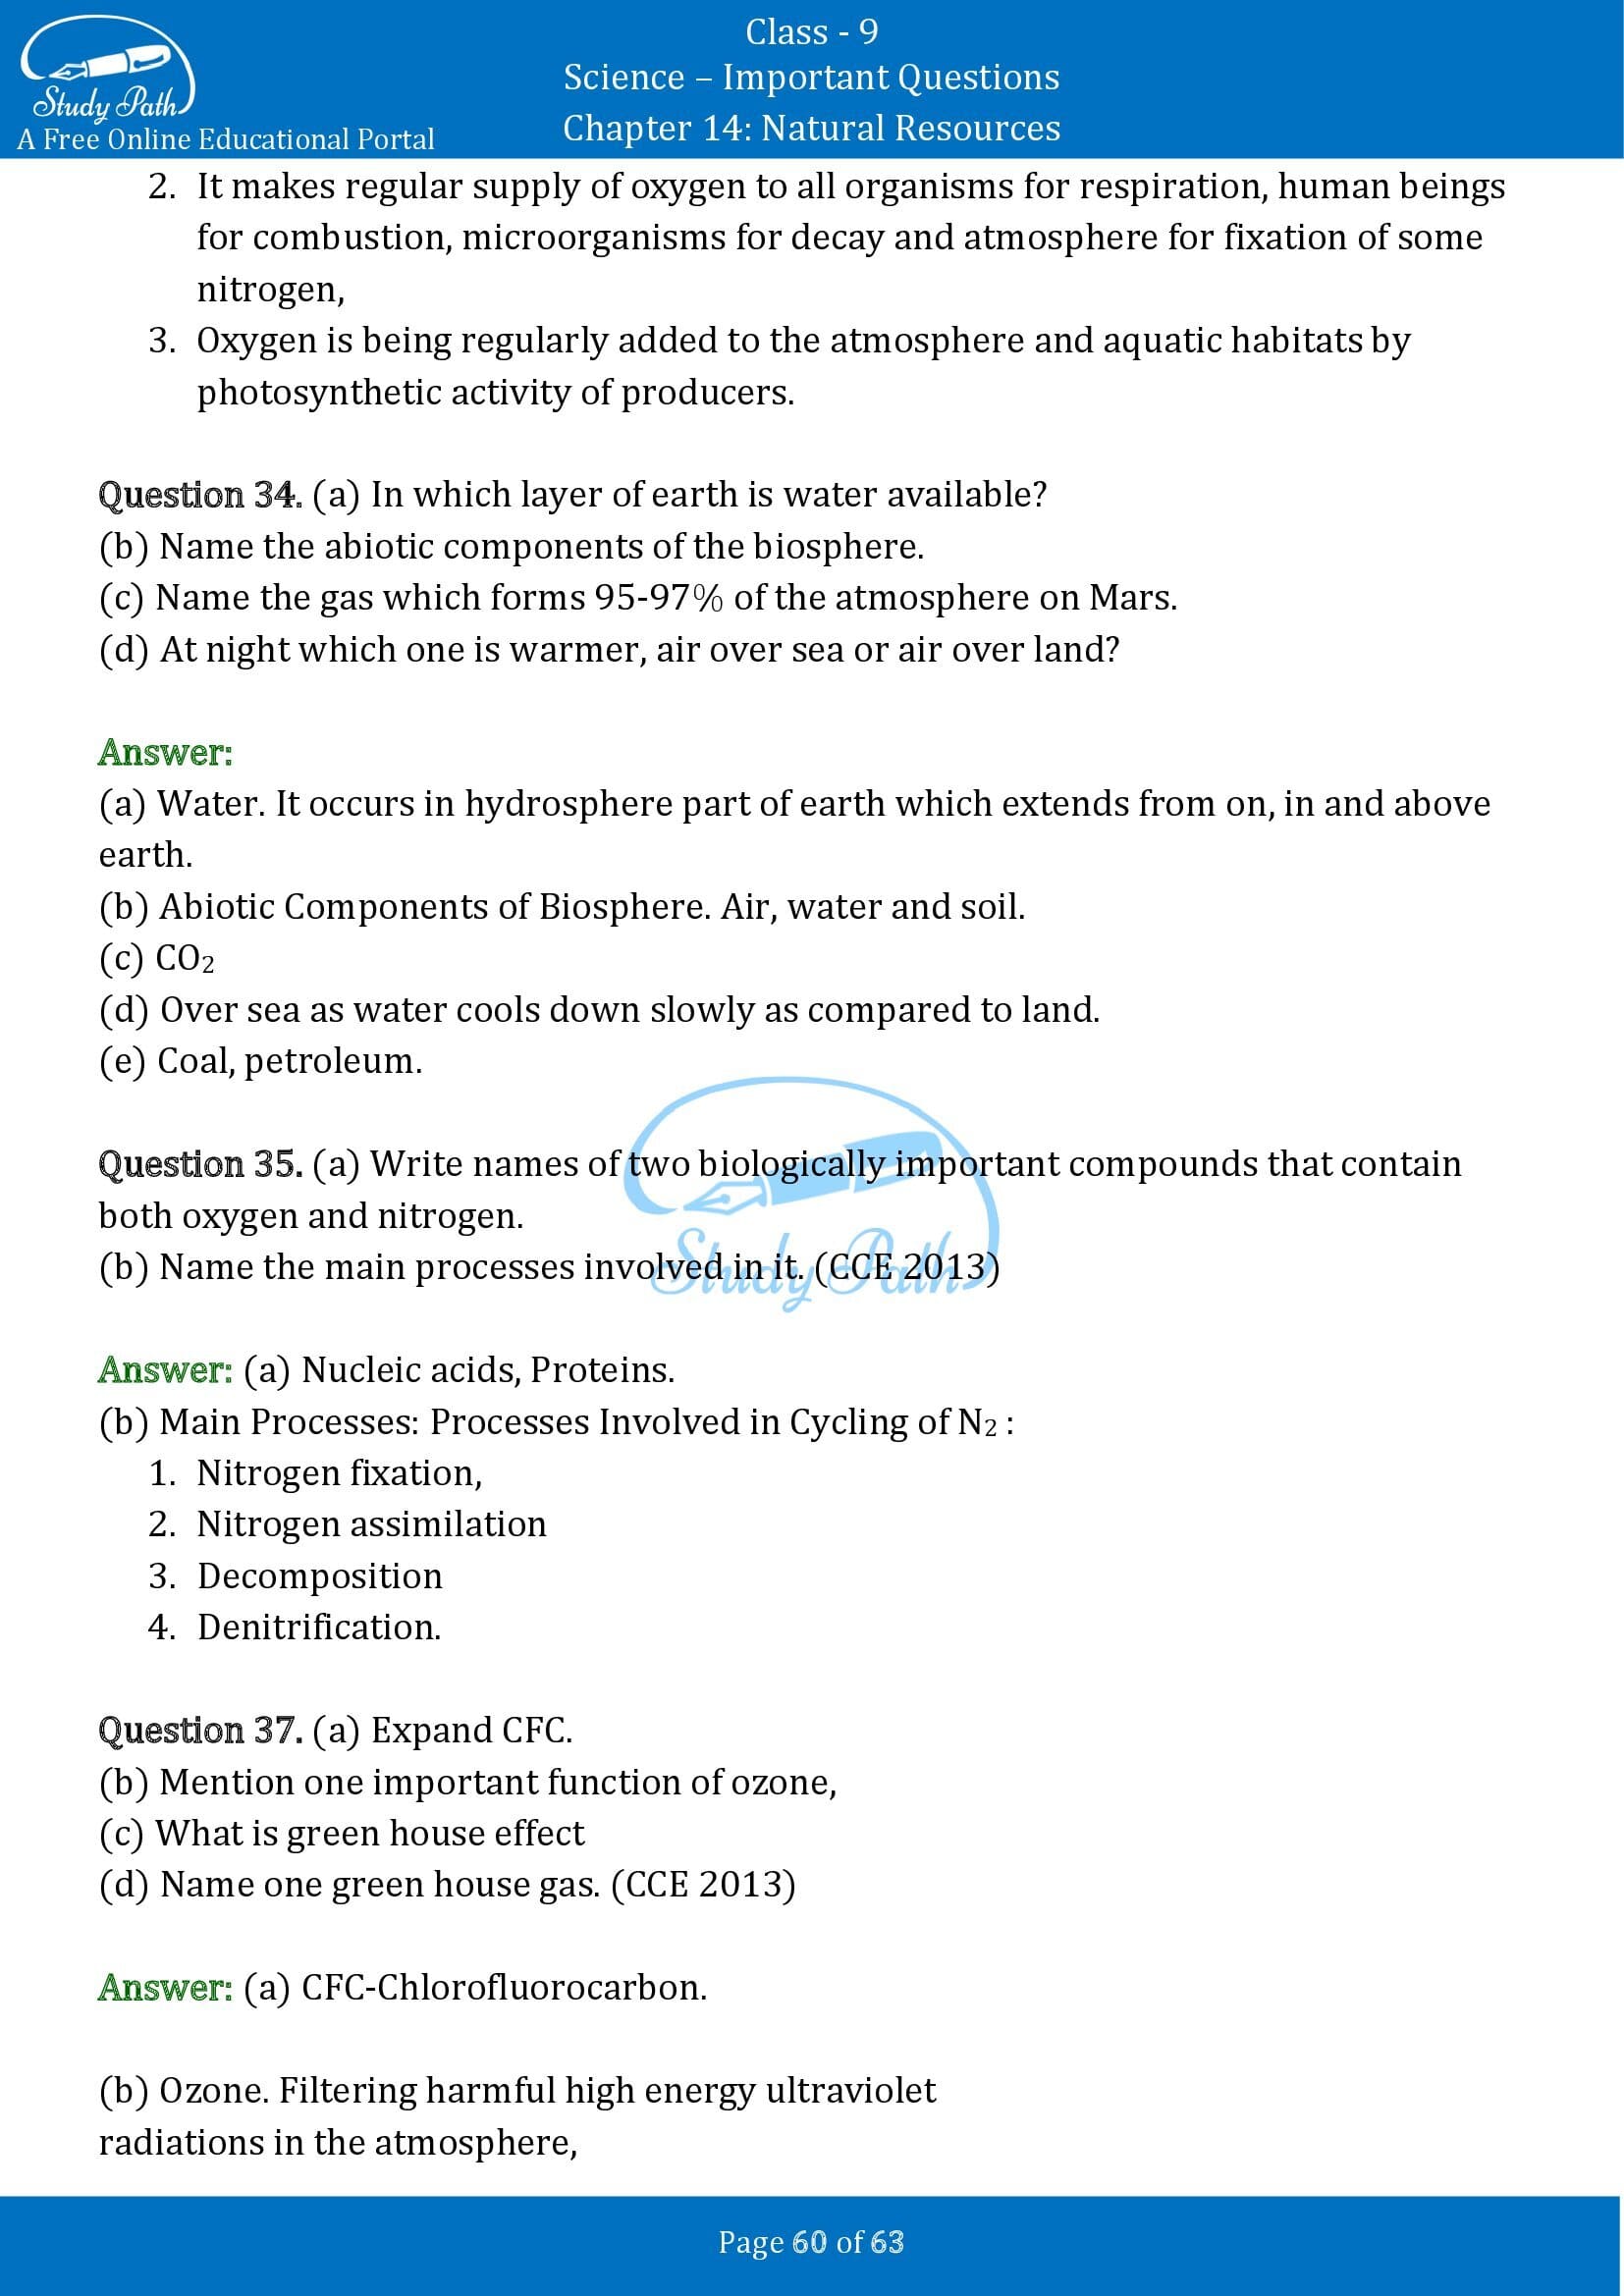 Important Questions for Class 9 Science Chapter 14 Natural Resources 00060